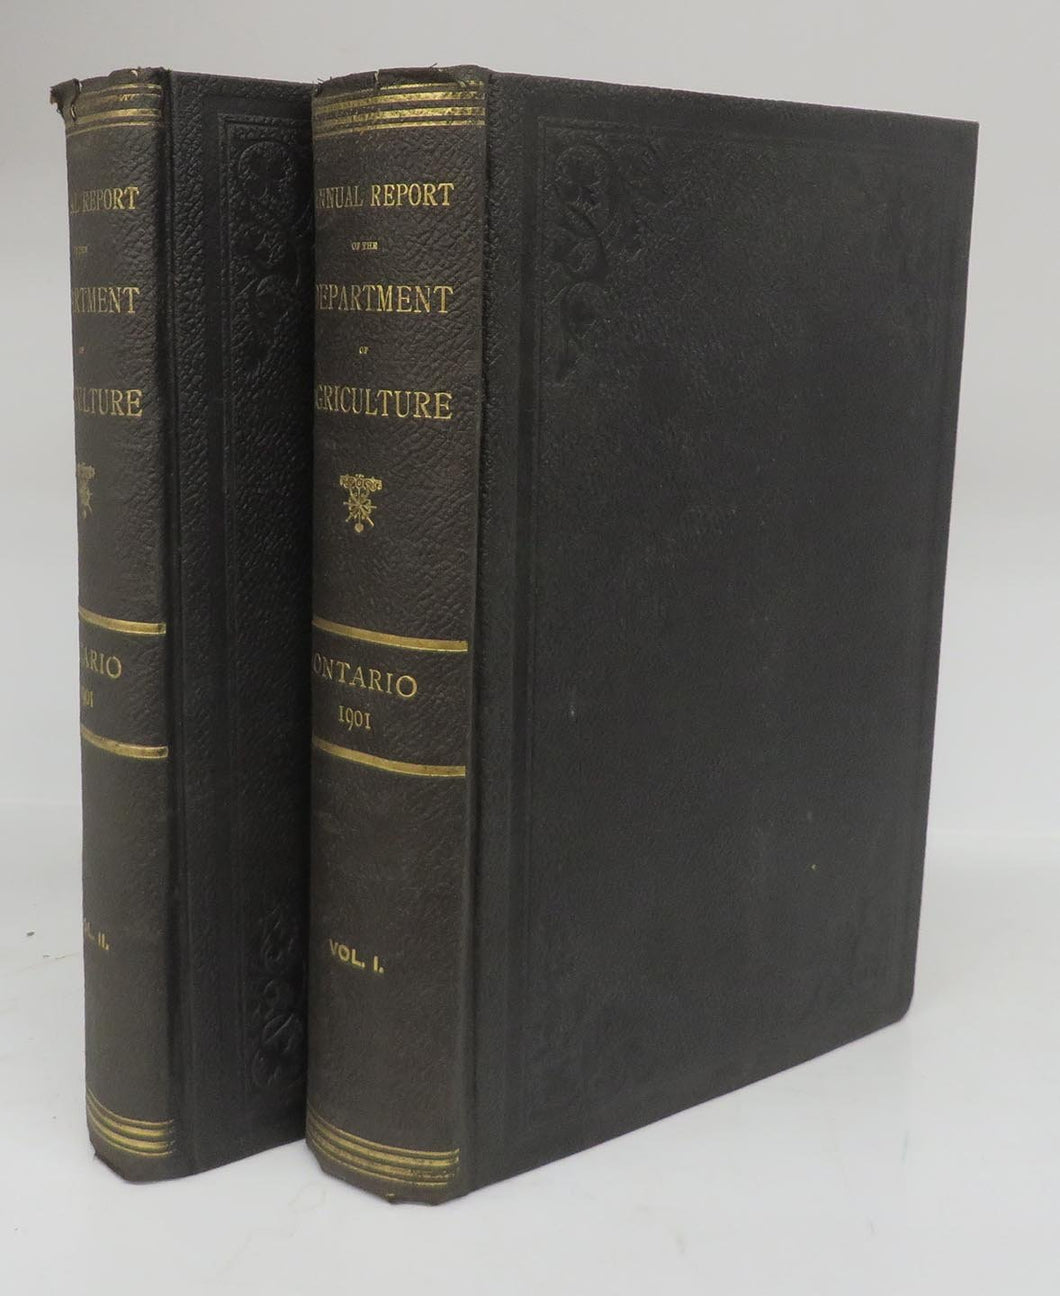 Annual Report of the Department of Agriculture of the Province of Ontario. 1901. Vols. I & II